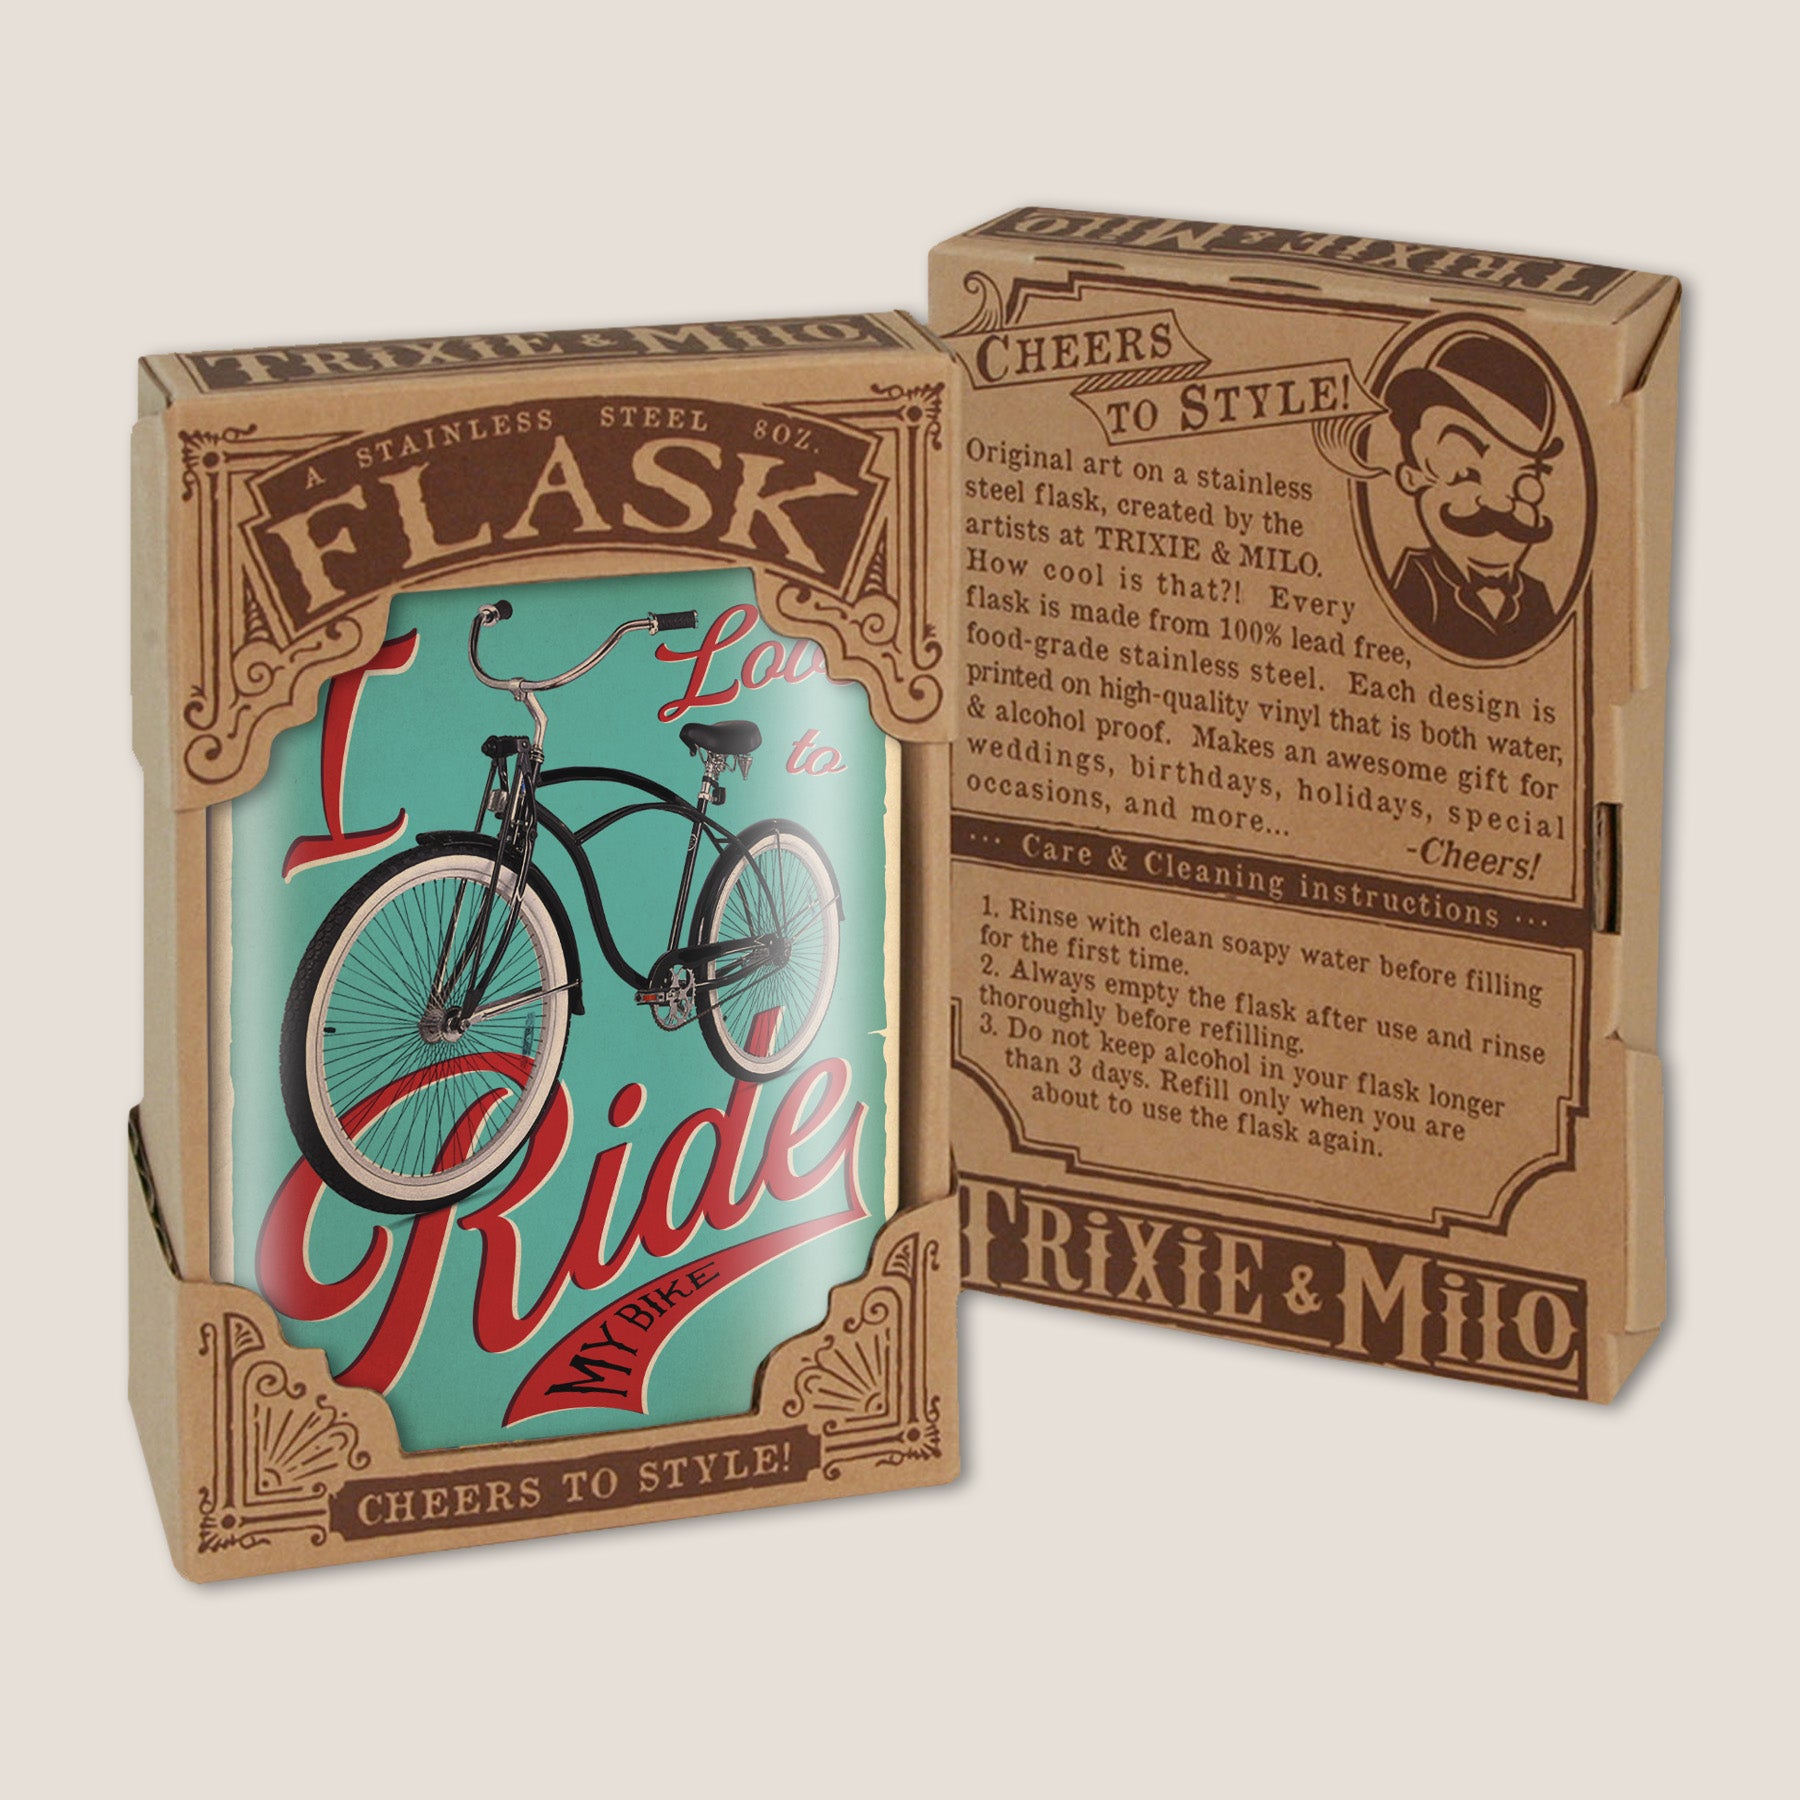 8 oz. Hip Flask: I Love To Ride My Bike Kick off every holiday or party with confidence. Cool stylish stainless steel drinking flask. Designed for durability and vintage aesthetic appeal in gift box